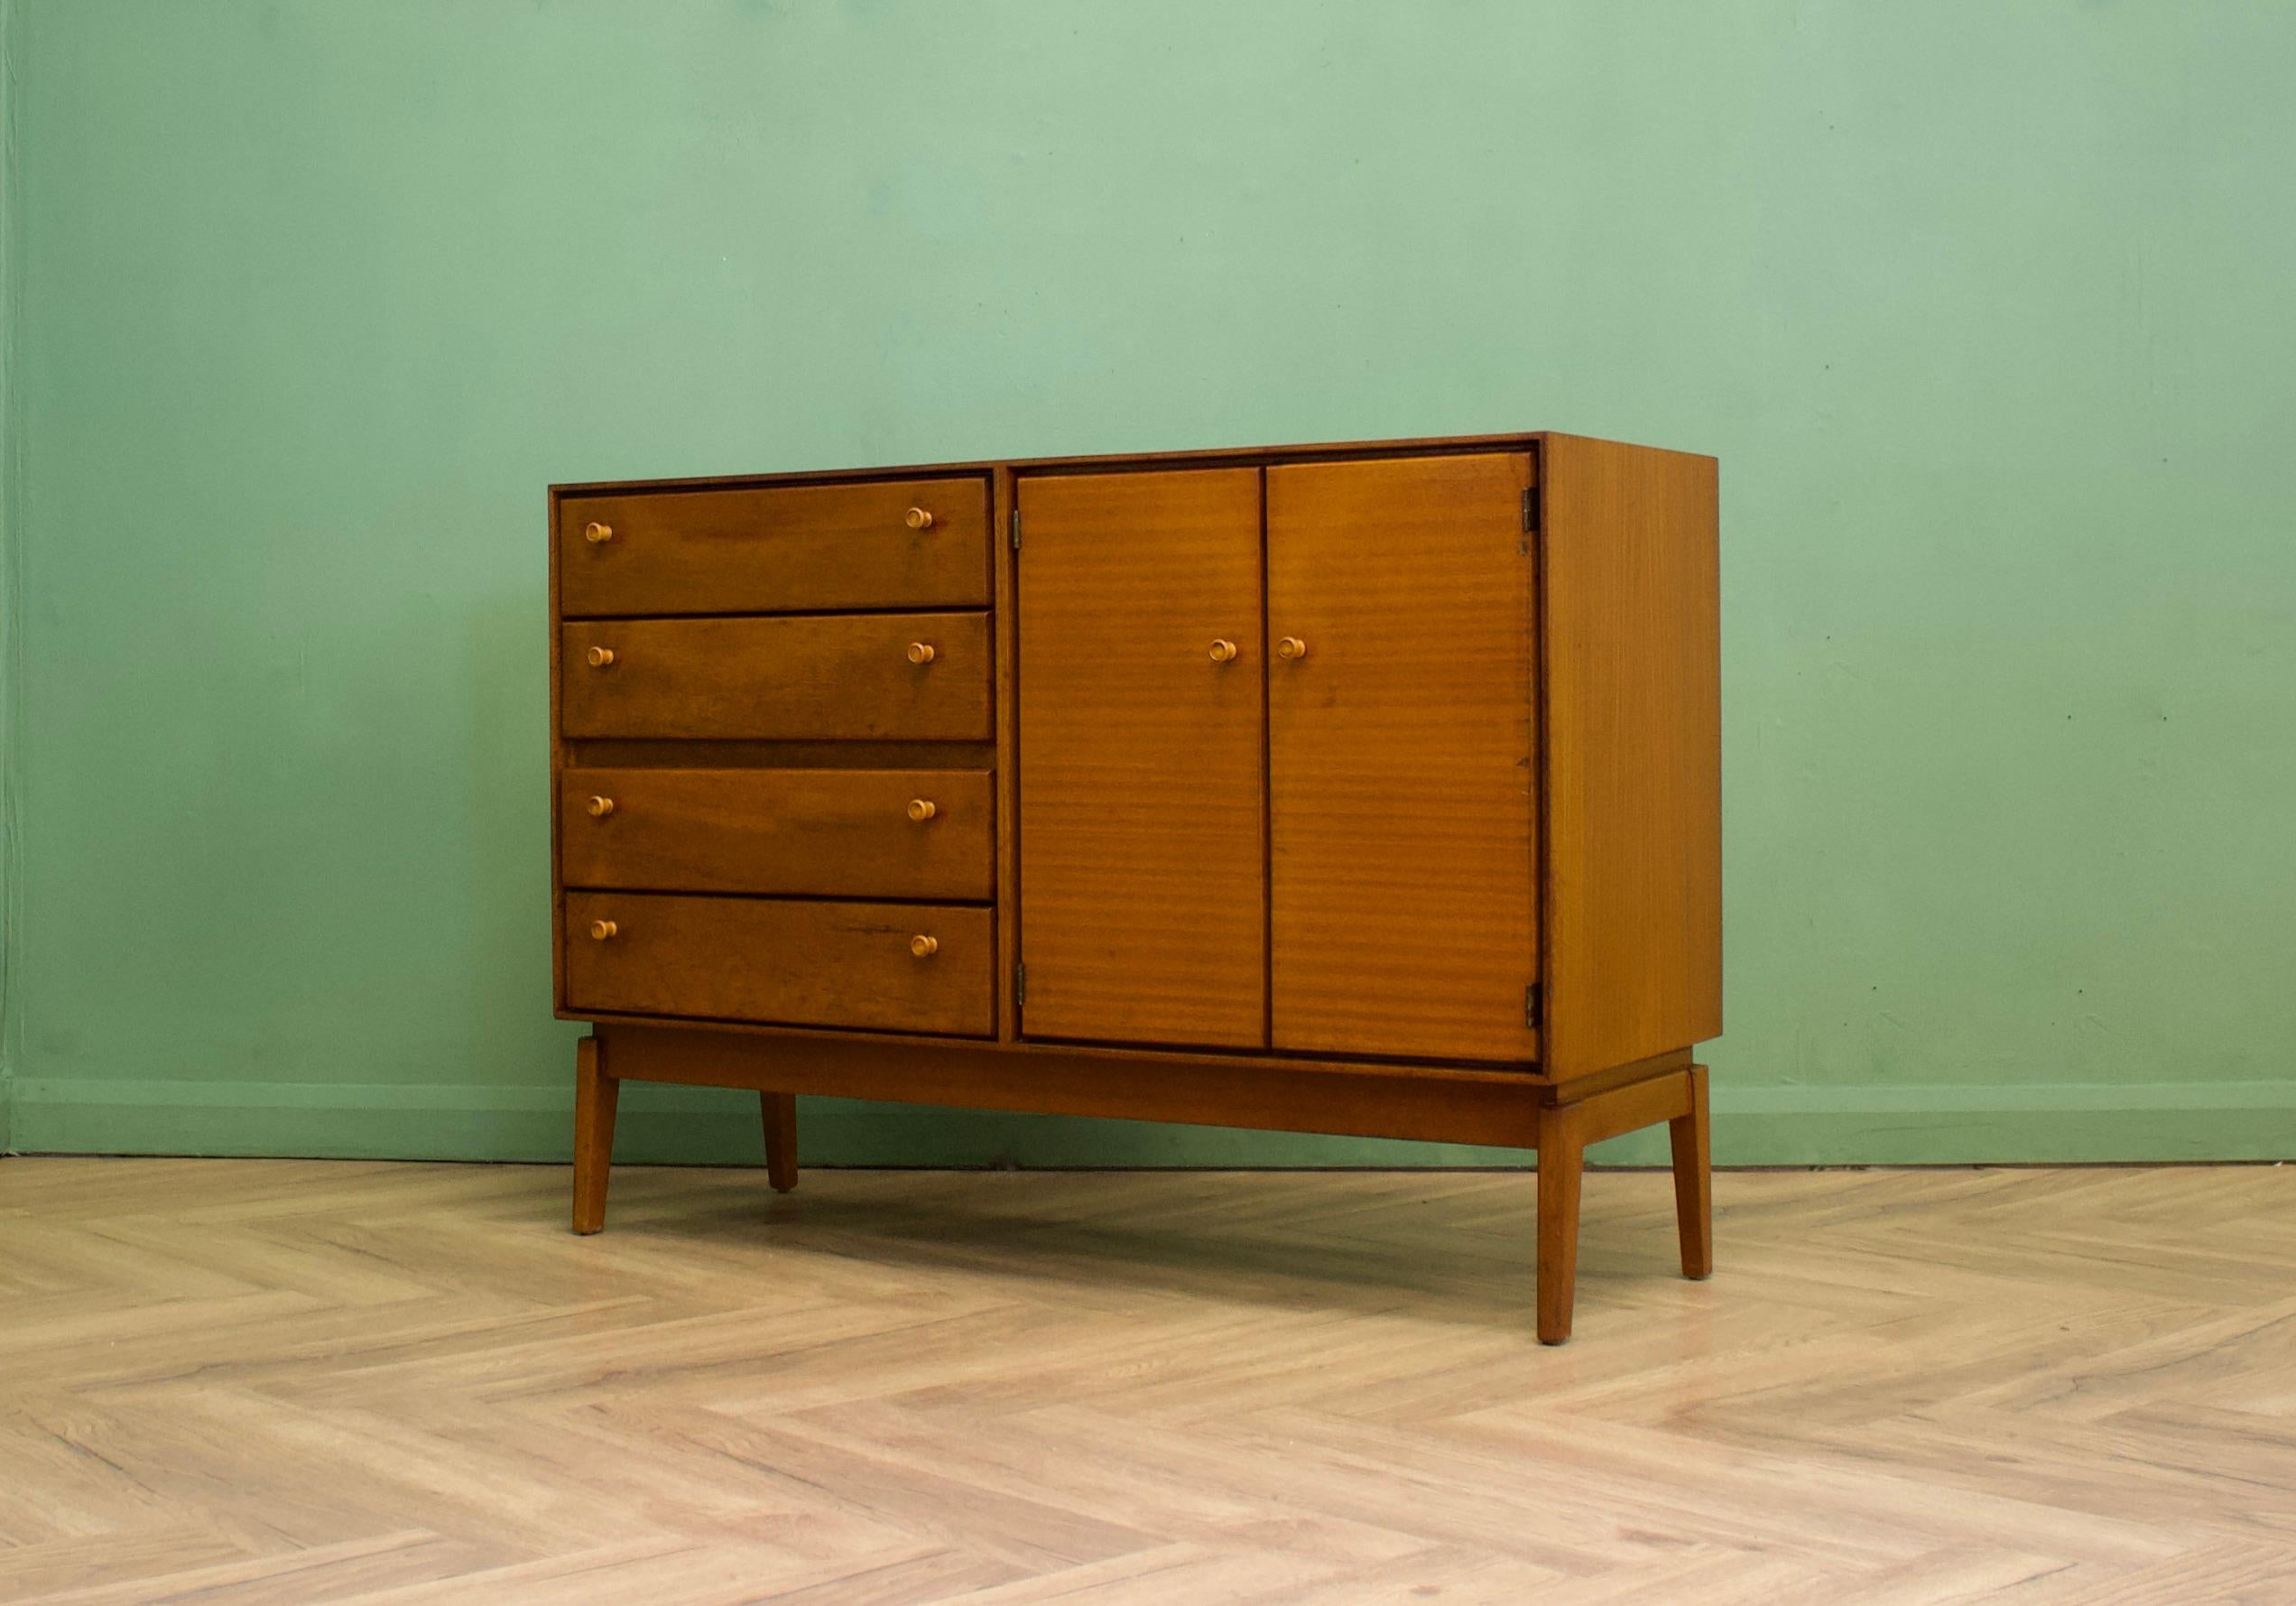 British Teak Fresco Sideboard from Minty, 1960s For Sale